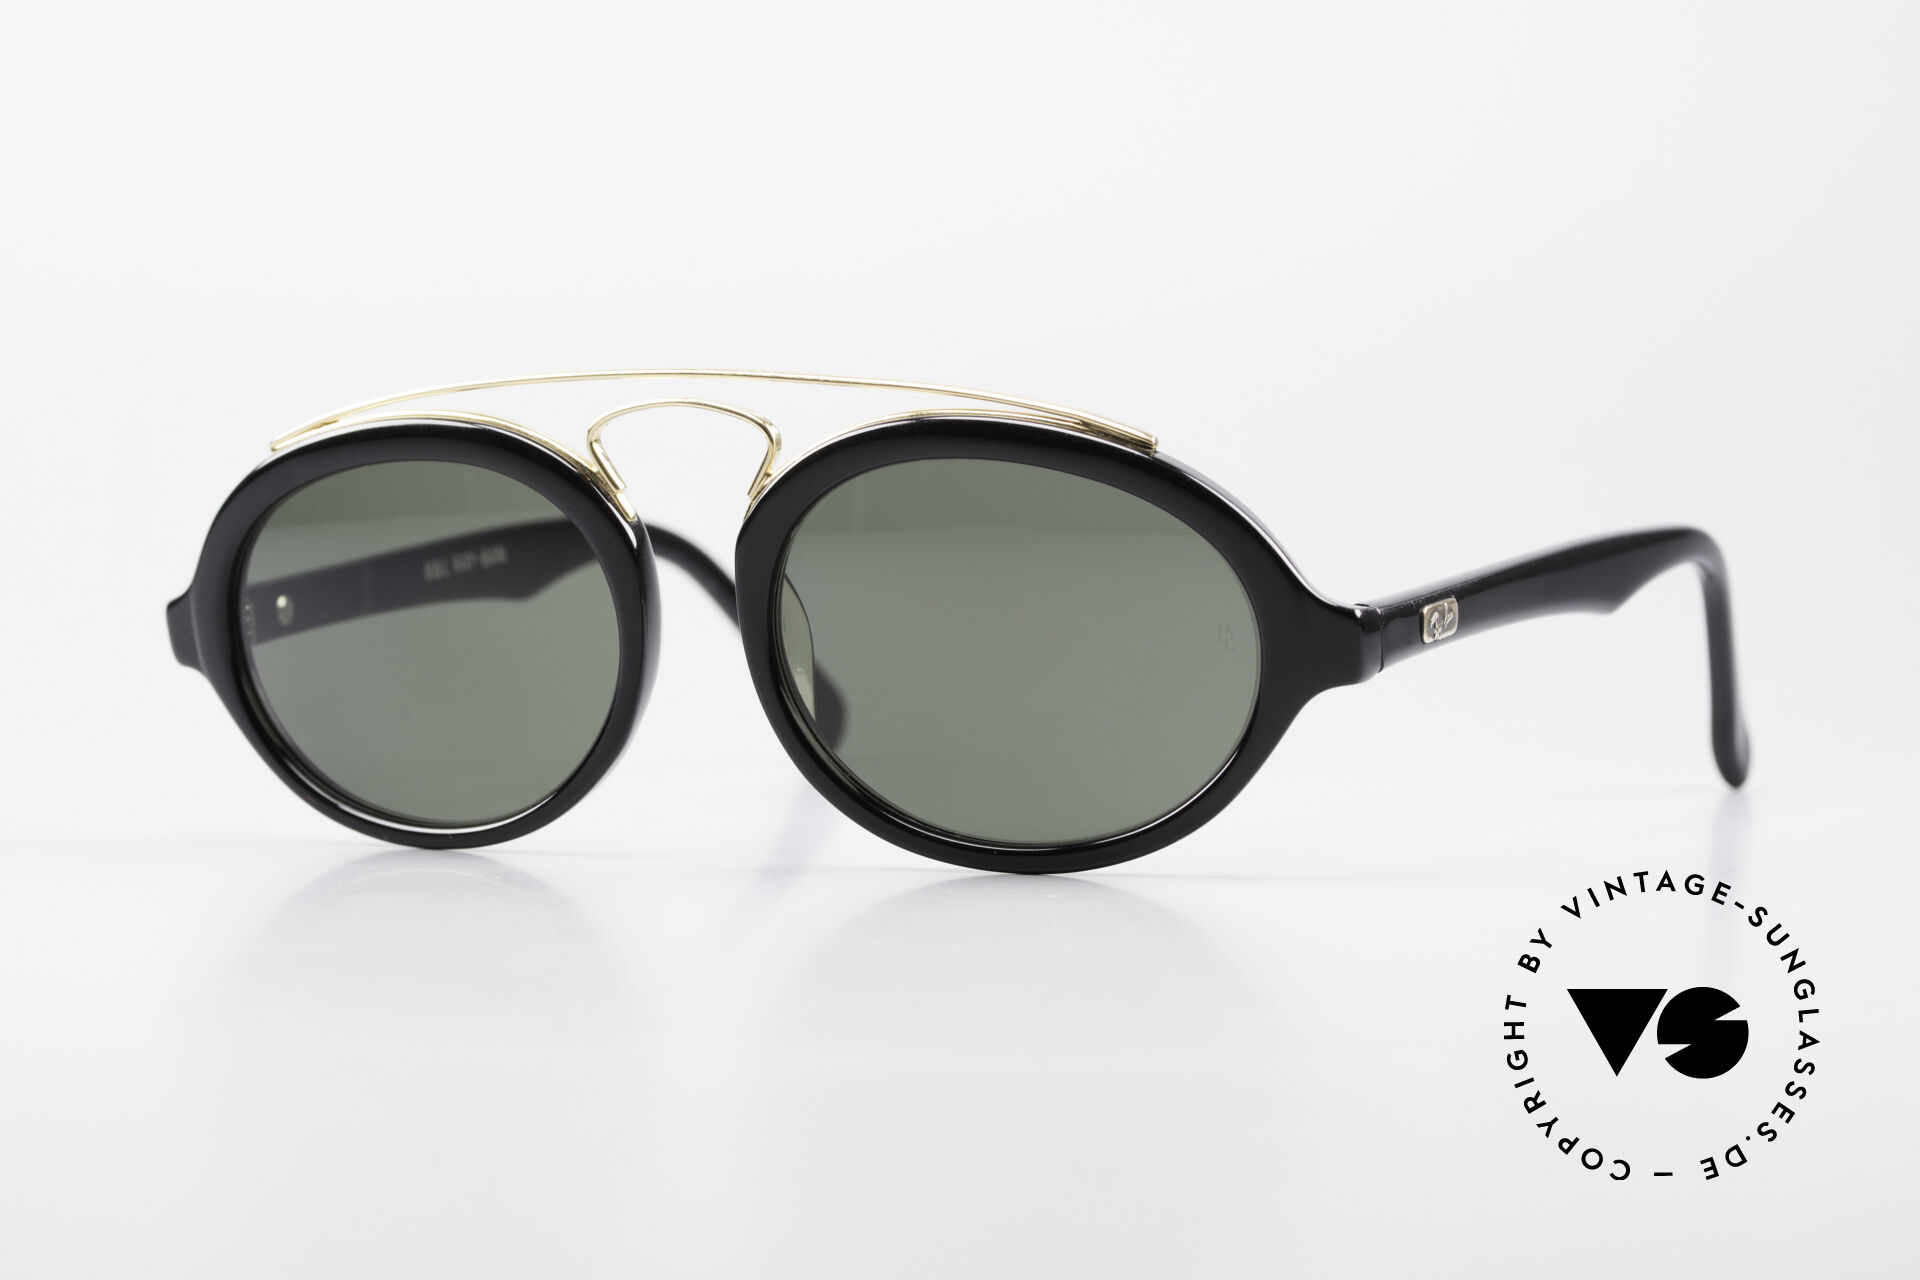 Nationale volkstelling afstuderen Slaapkamer Sunglasses Ray Ban Gatsby Style 6 Old USA Ray-Ban Sunglasses